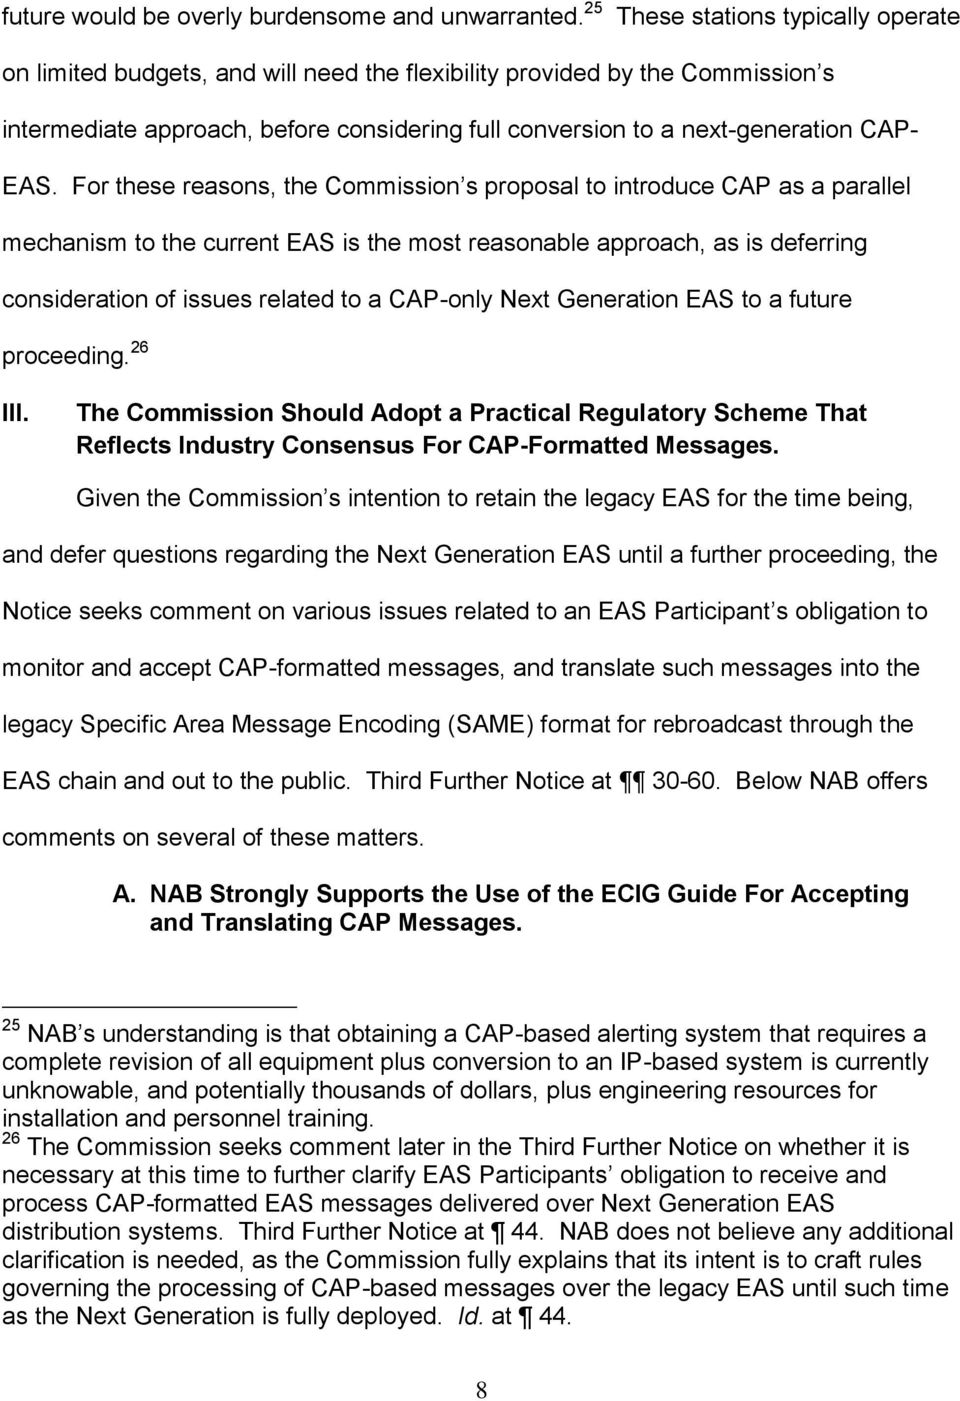 EAS. For these reasons, the Commission s proposal to introduce CAP as a parallel mechanism to the current EAS is the most reasonable approach, as is deferring consideration of issues related to a